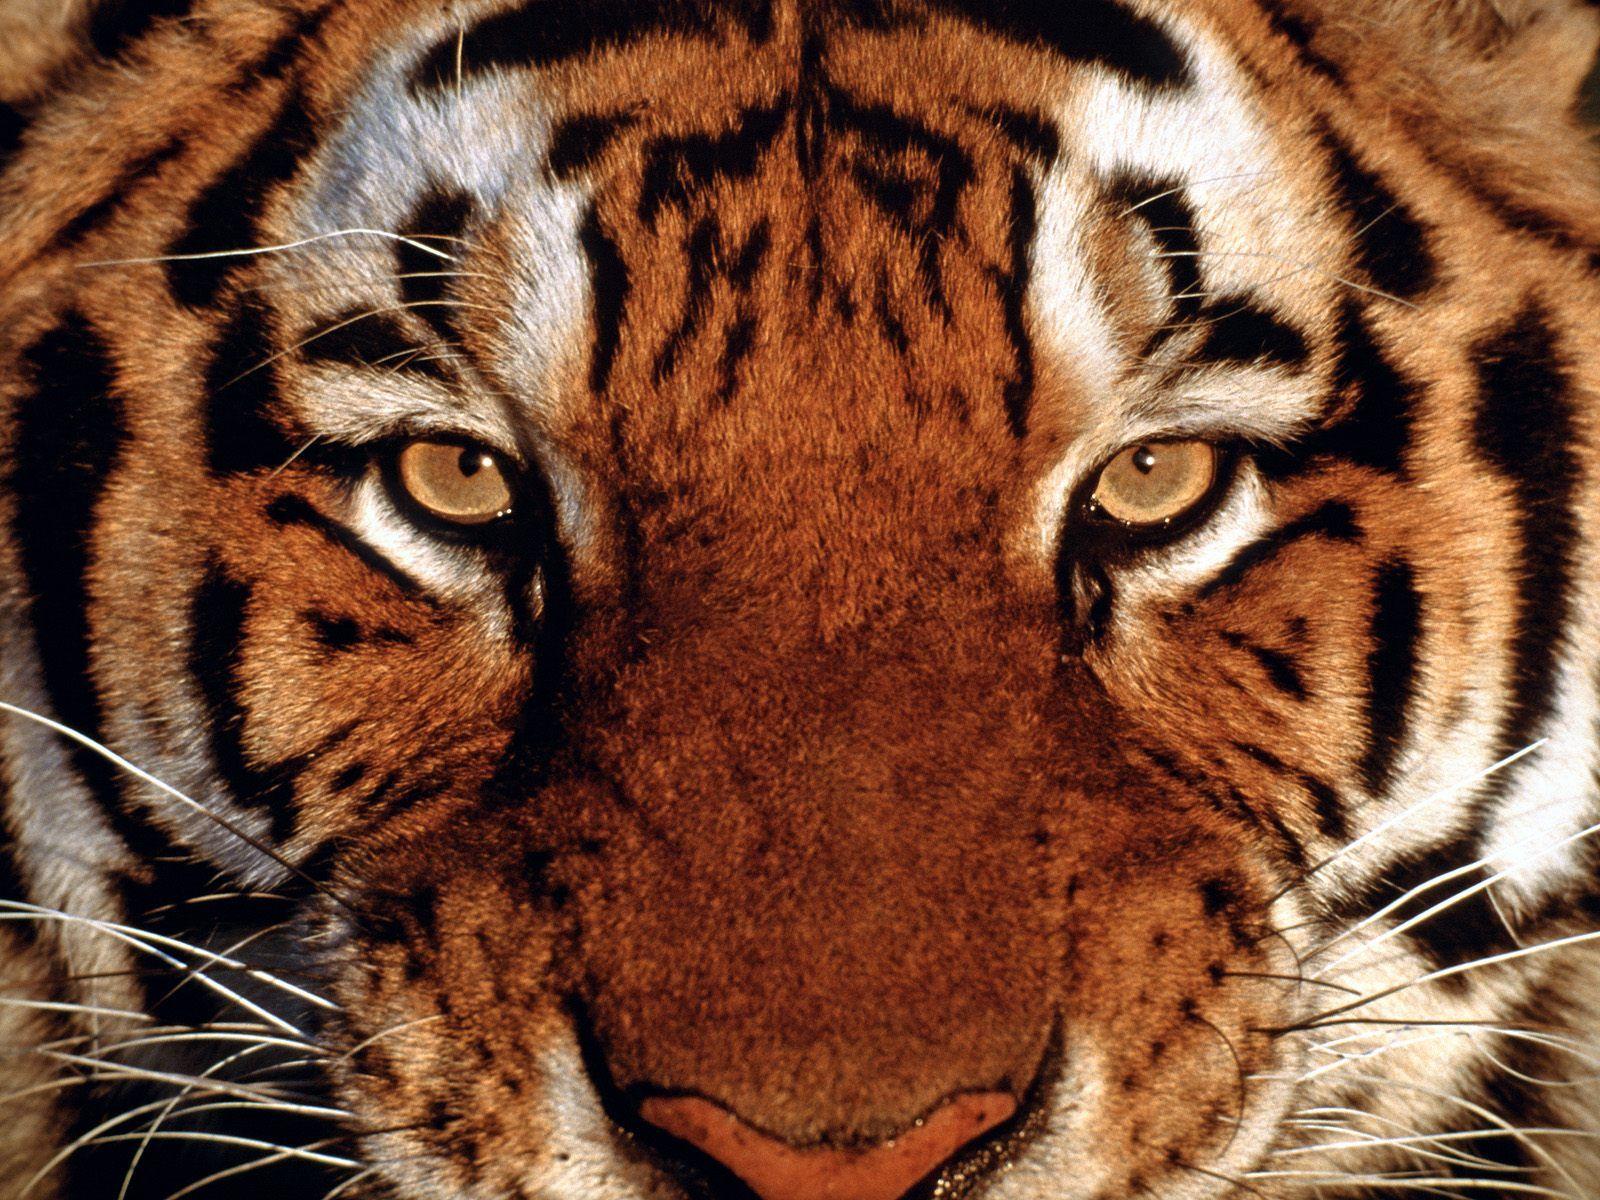 image Of Tigers Faces